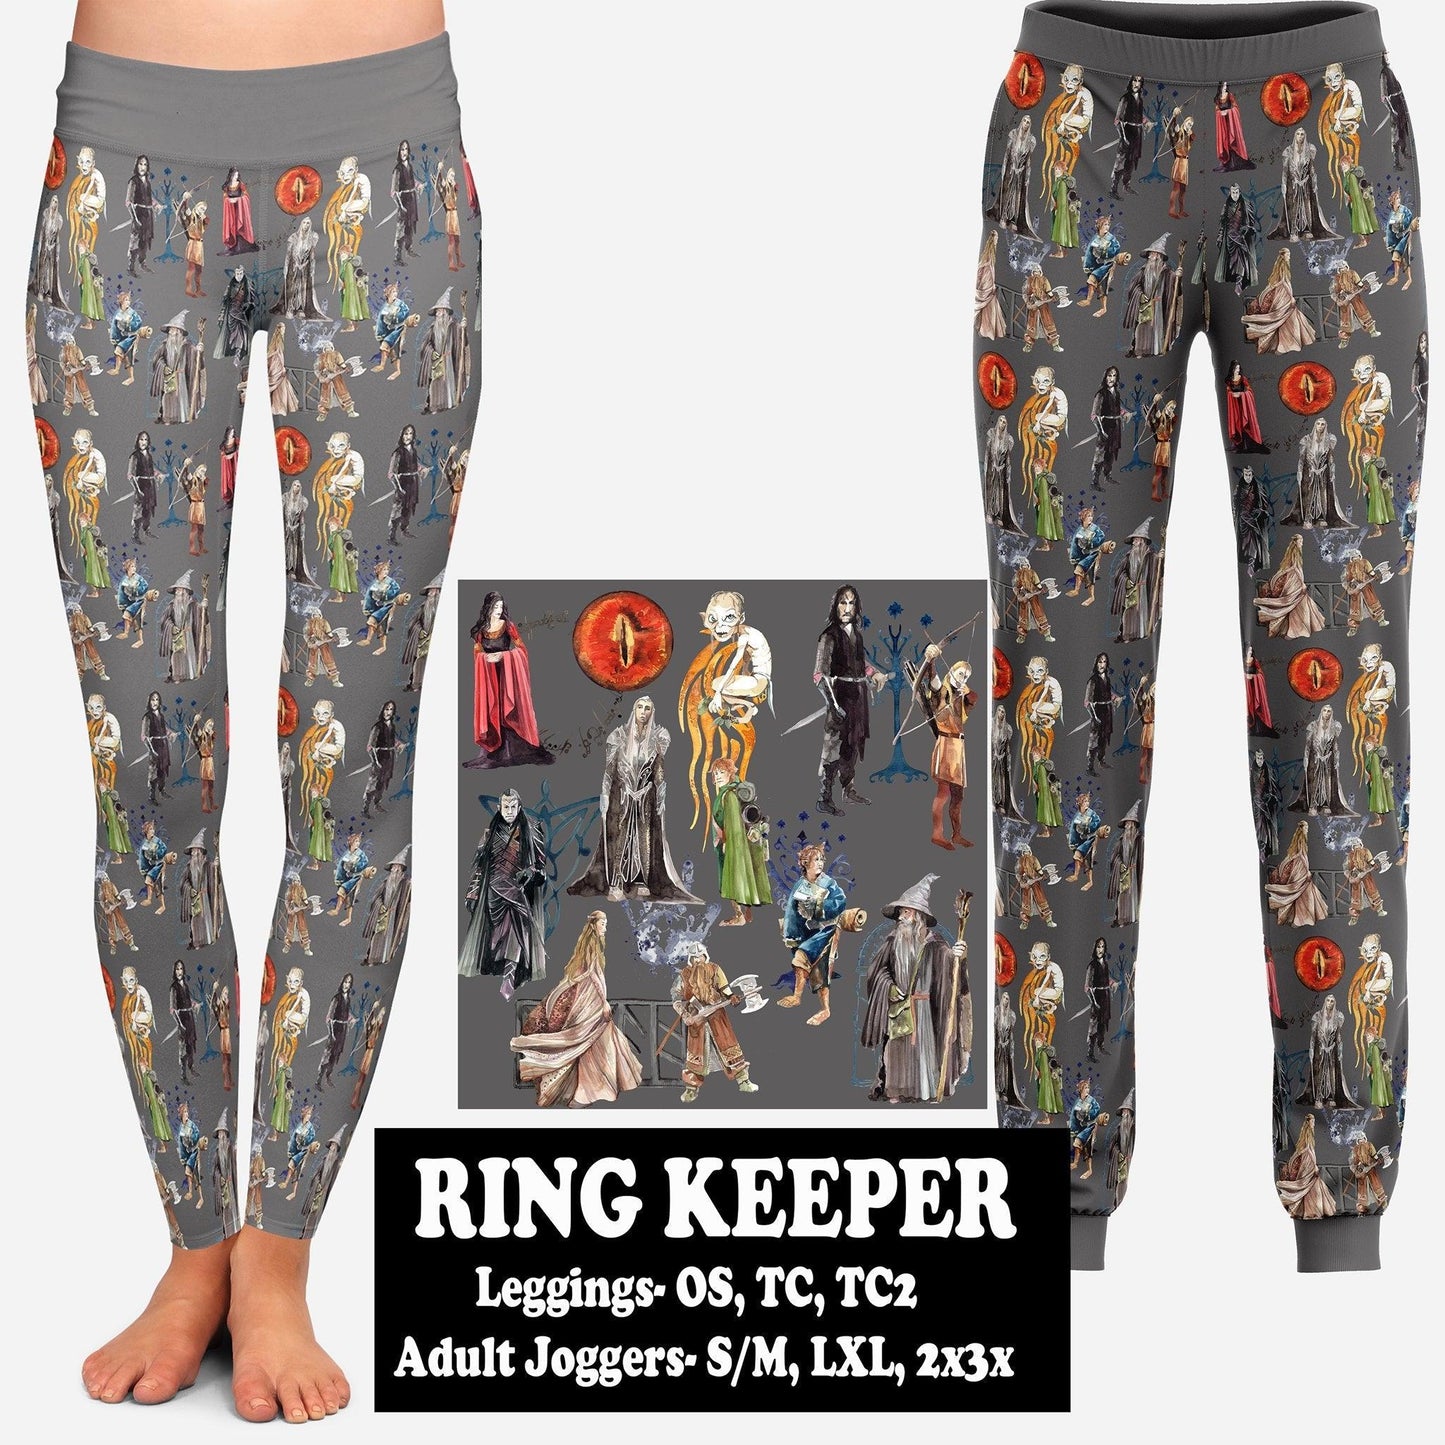 RING KEEPER LEGGINGS AND JOGGERS